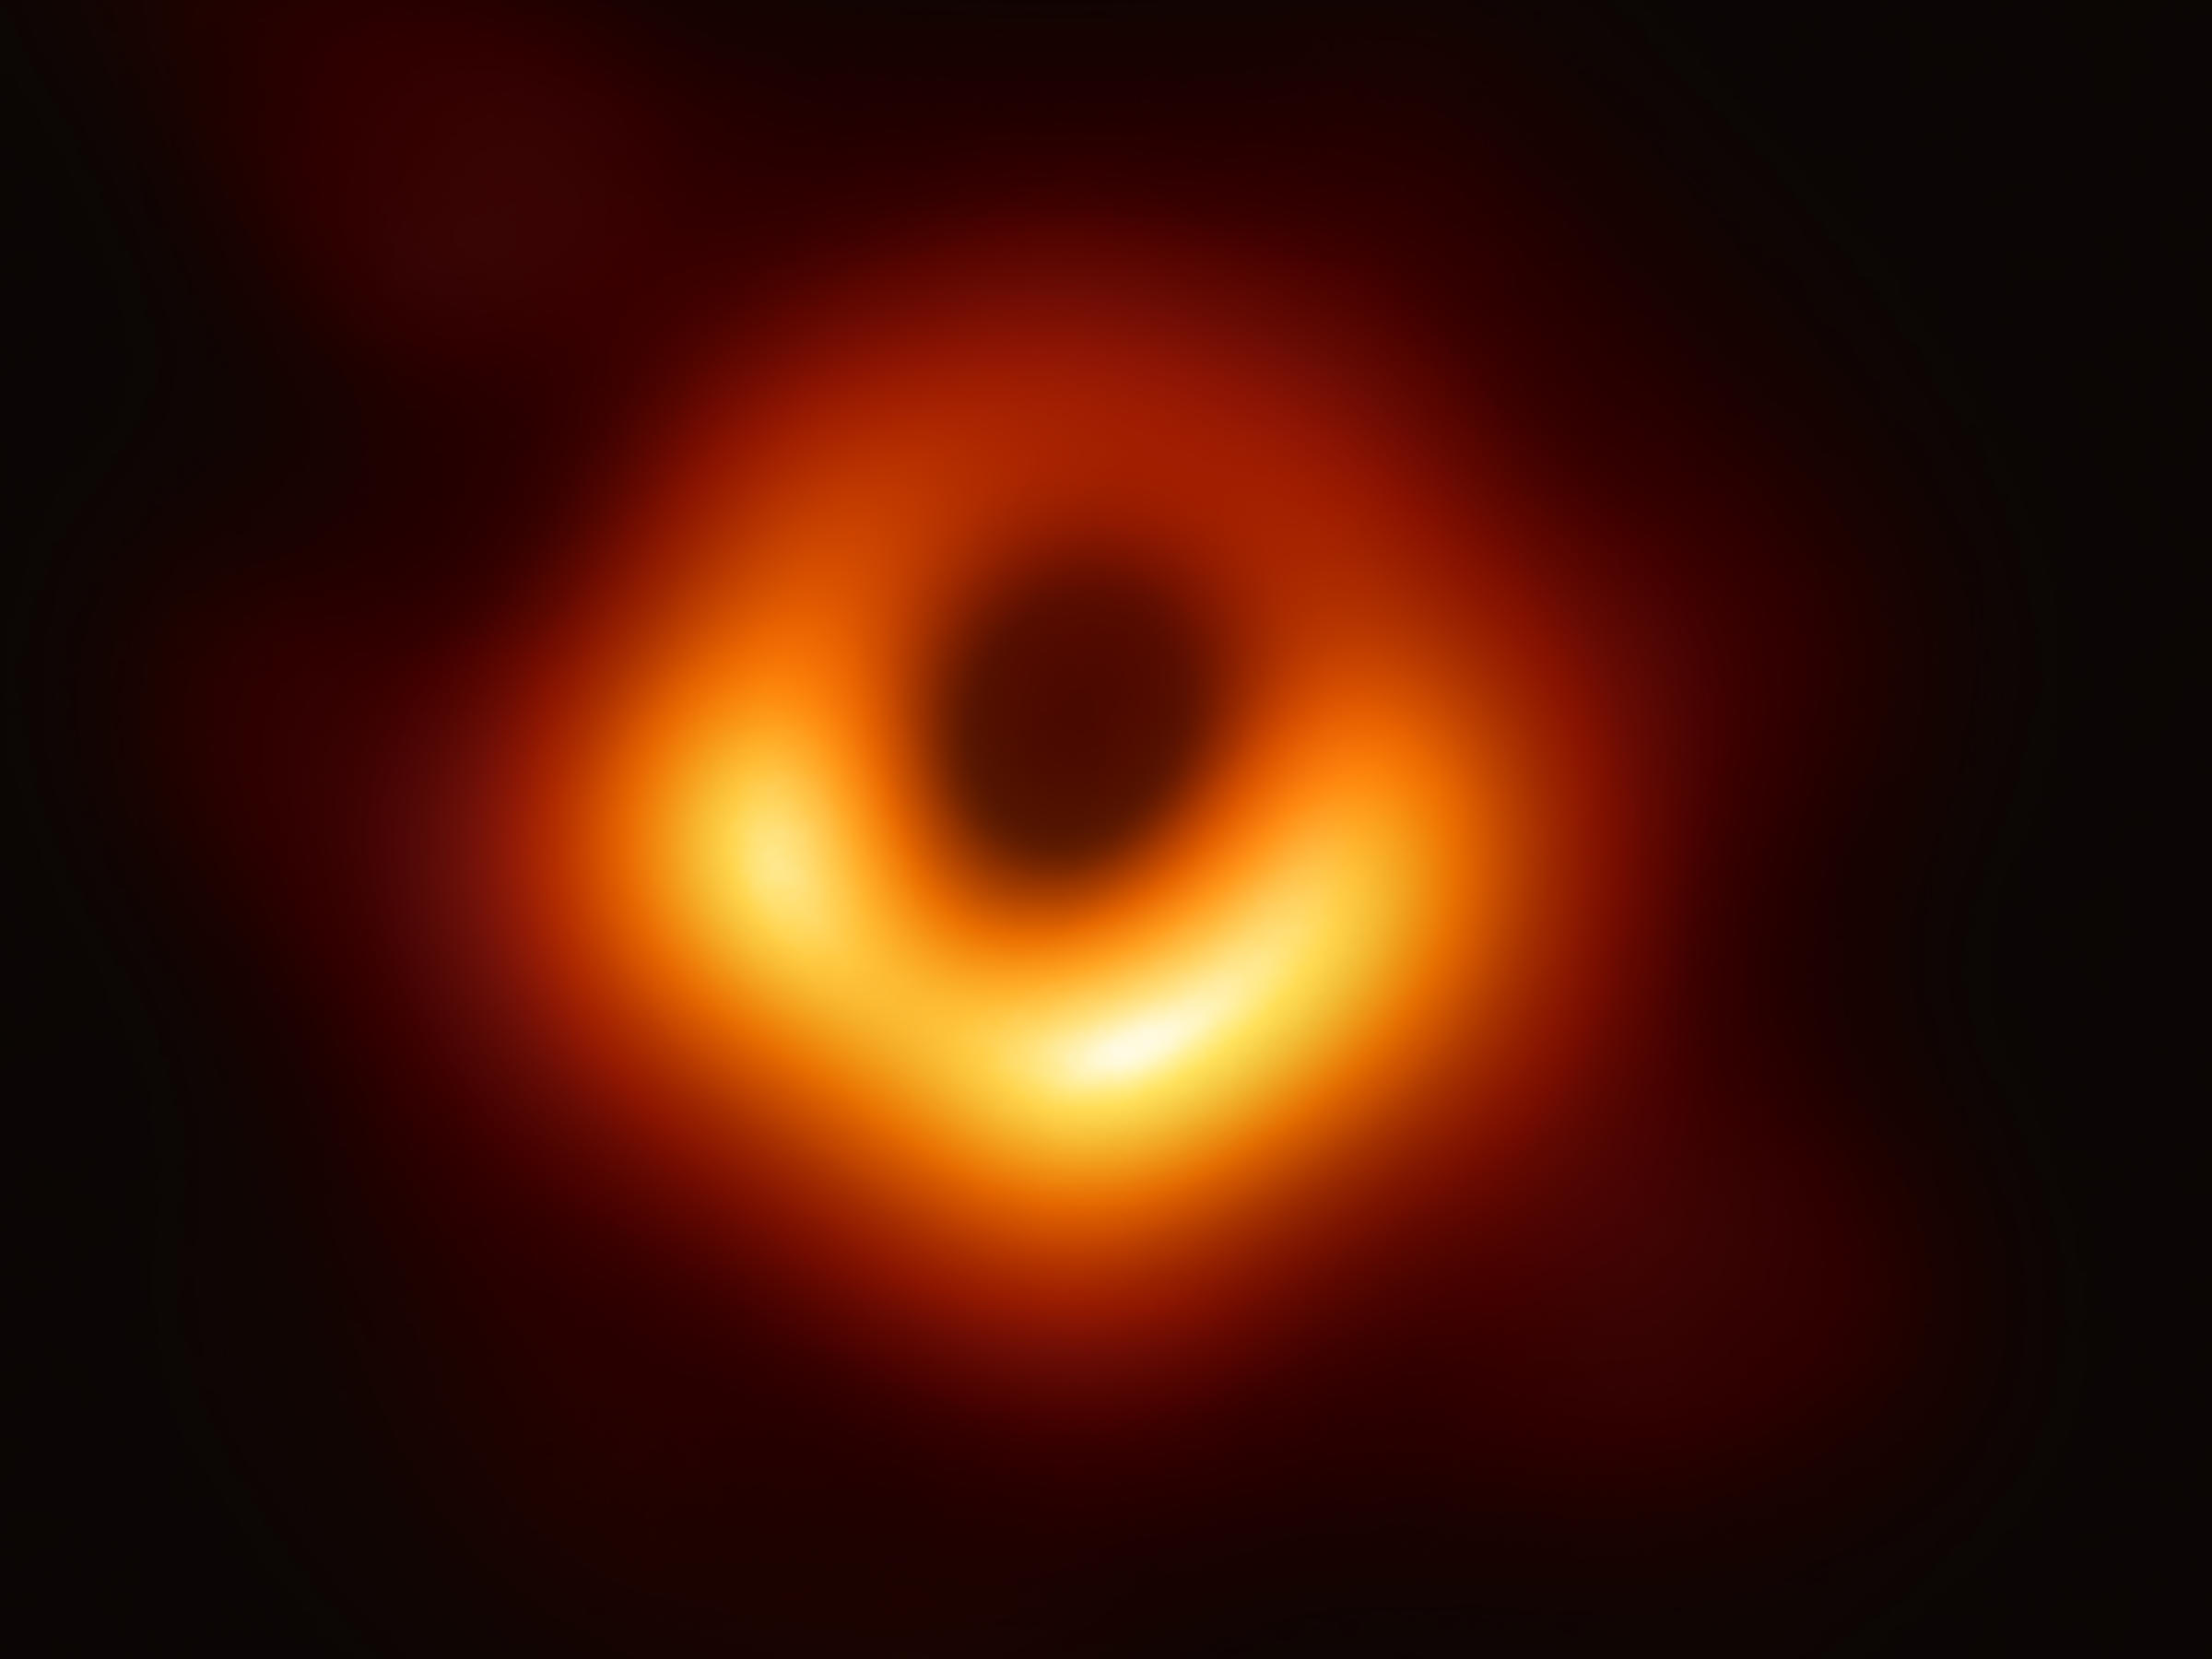 The First Ever Image of a Black Hole